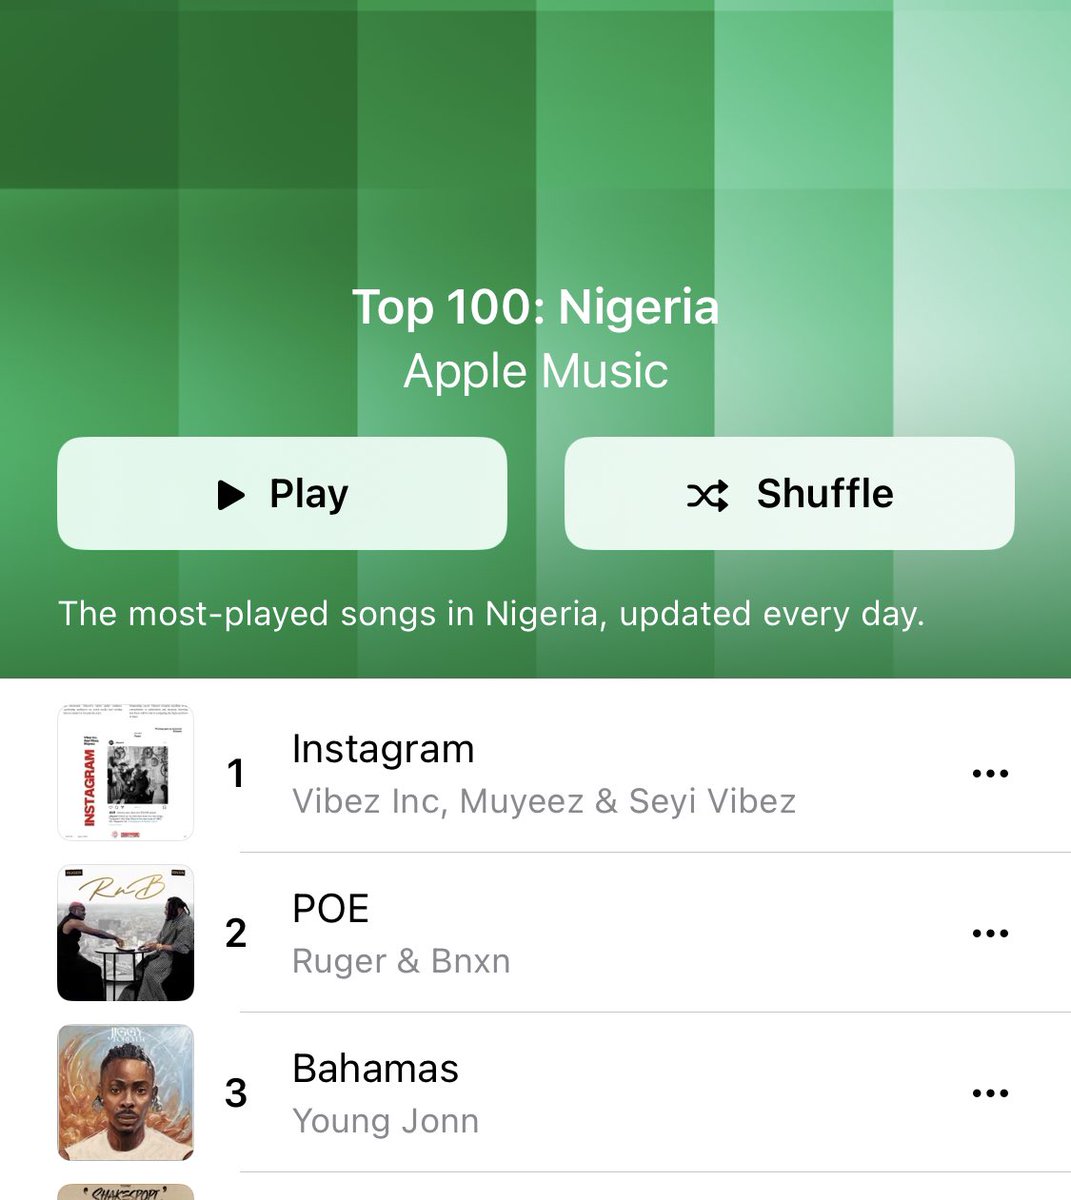 See as Seyi Vibez new artist don enter no.1 in less than 24hrs, old cats go just dey vex